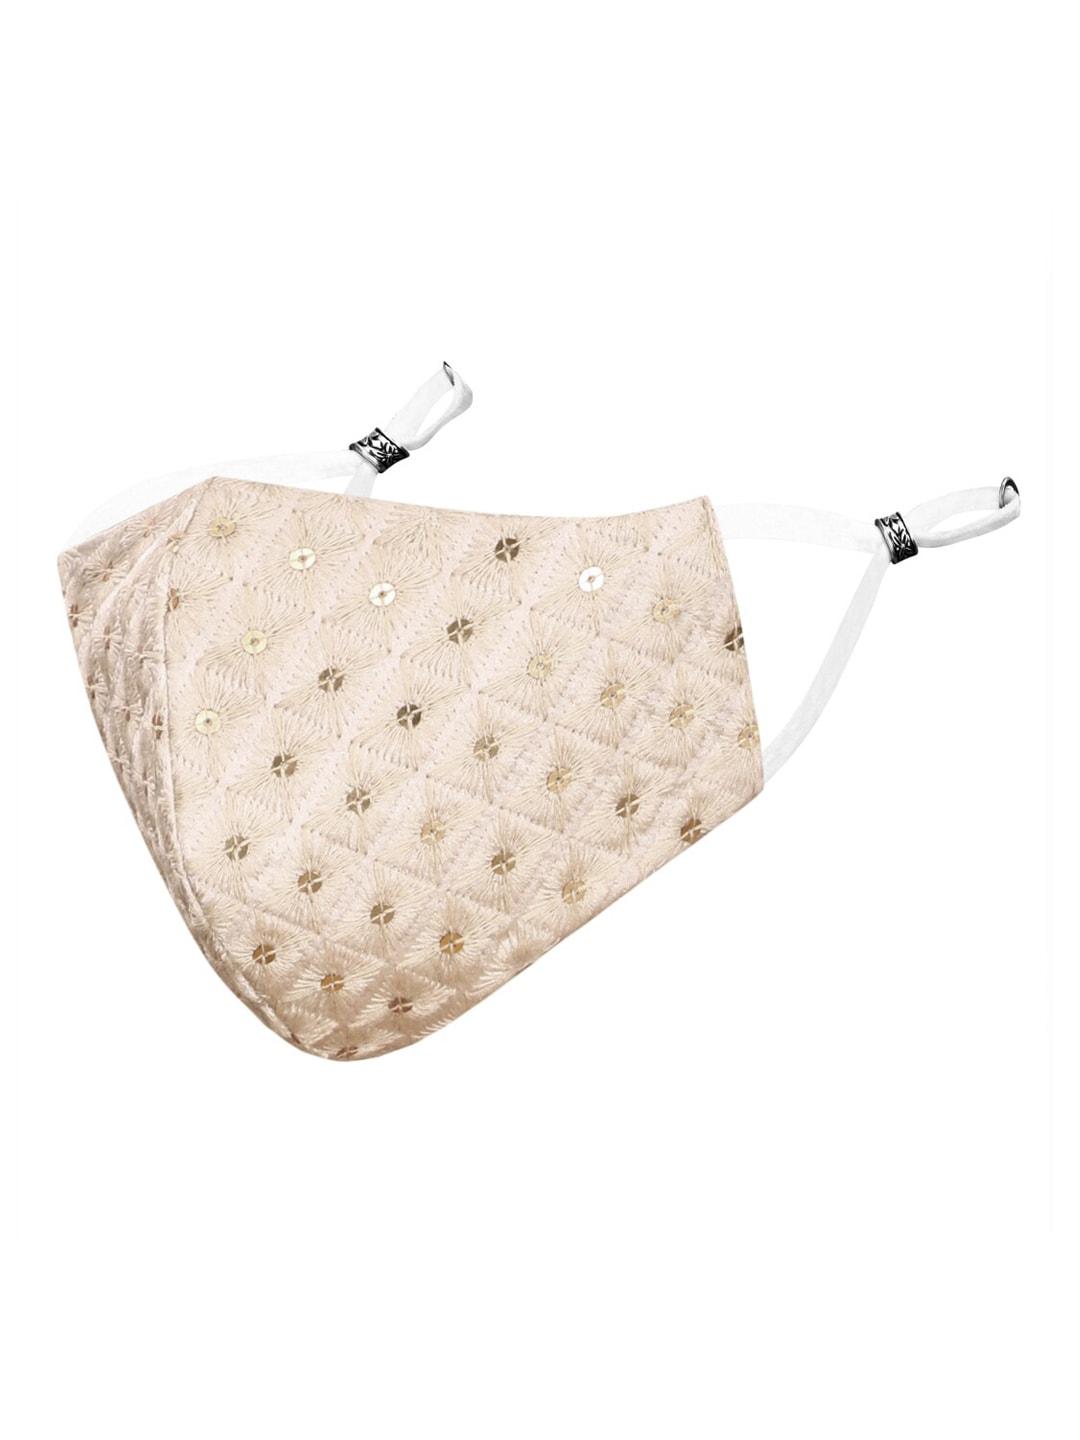 MASQ Beige Embroidered & Sequinned 4-Ply Reusable Anti-Pollution Cloth Mask